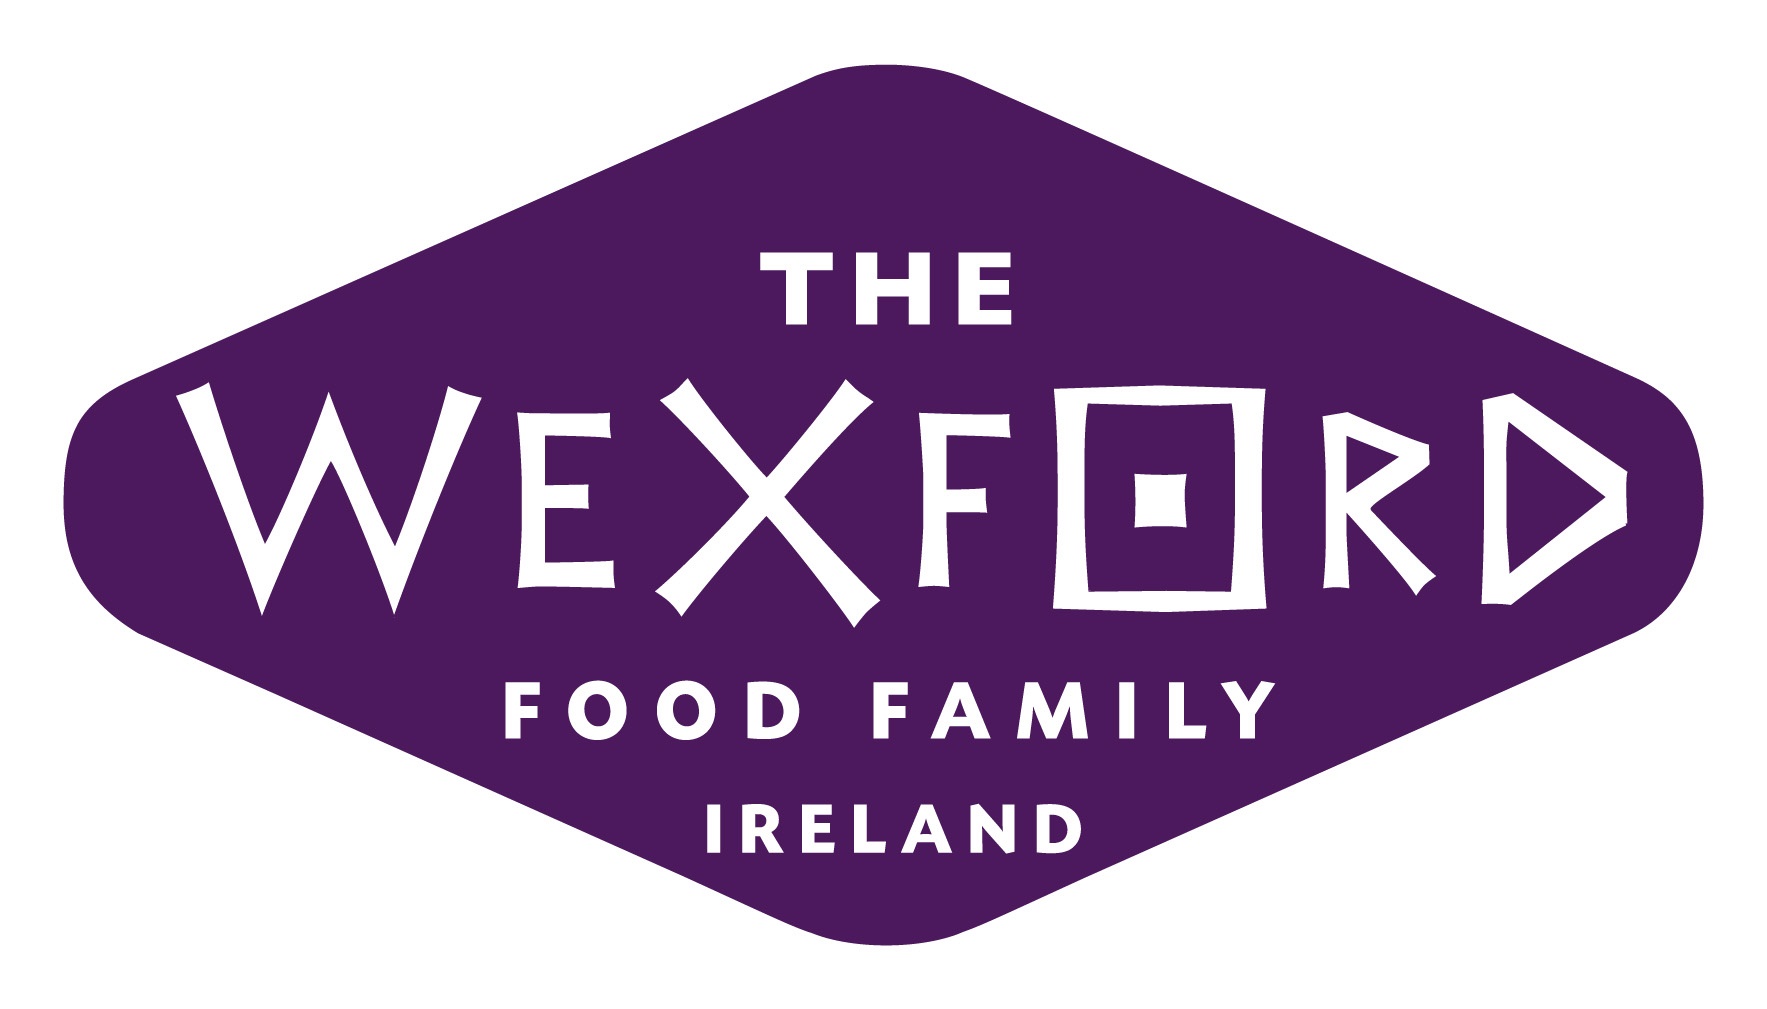 Wexford Food Family logo.